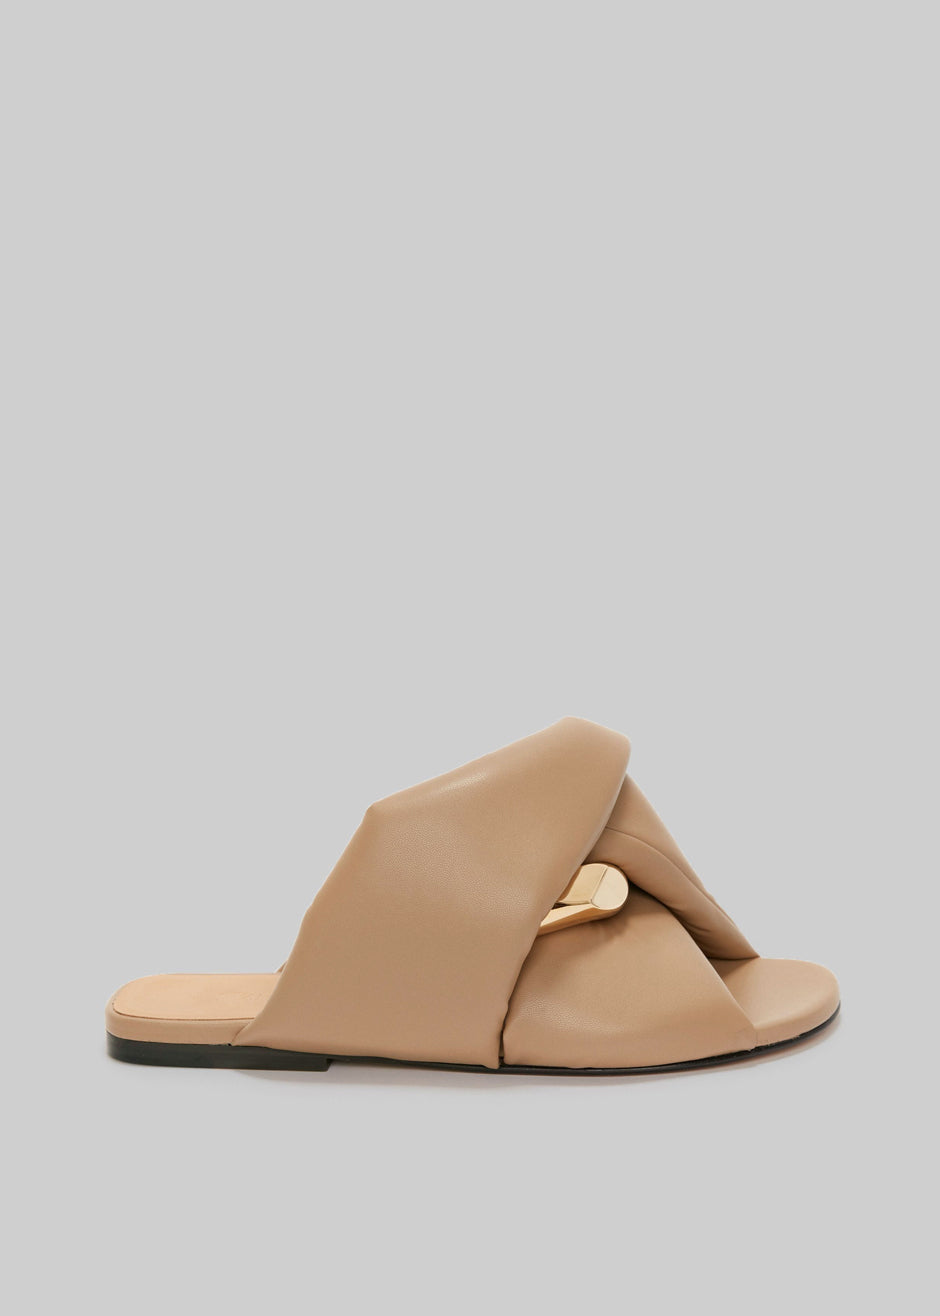 JW Anderson Chain Flat Sandals - Taupe - 2